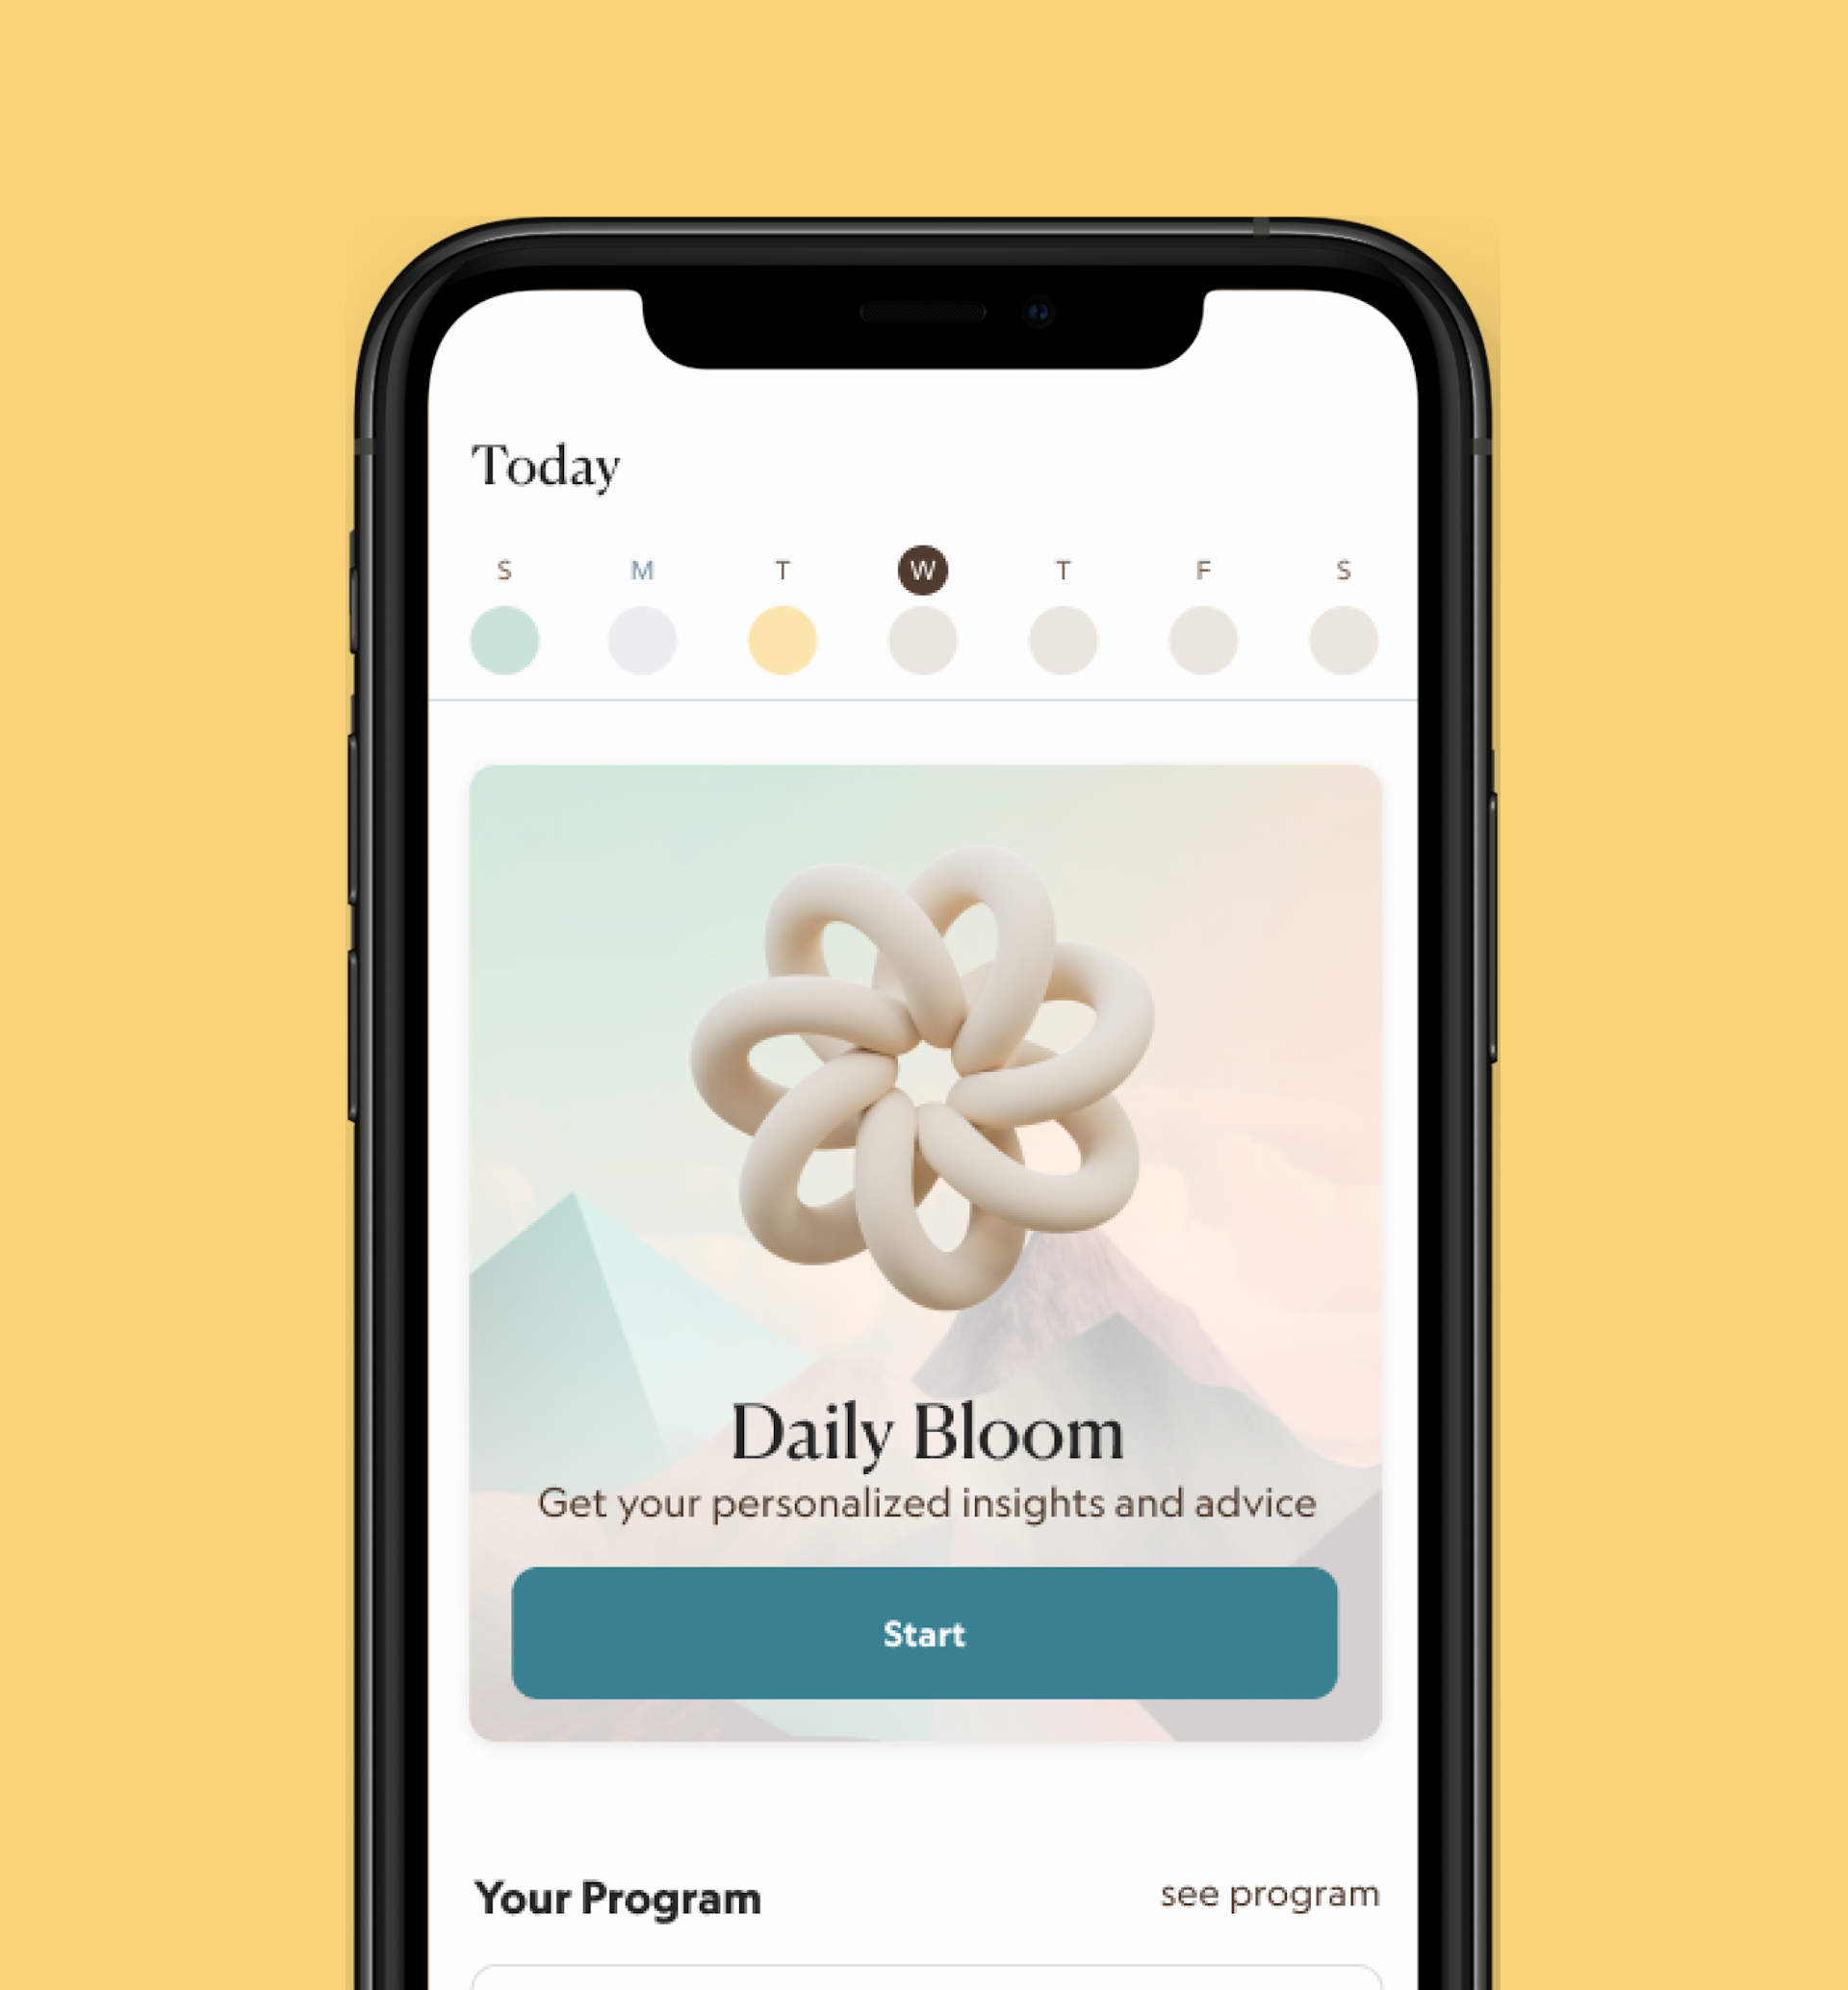 Designs we did for Bloom